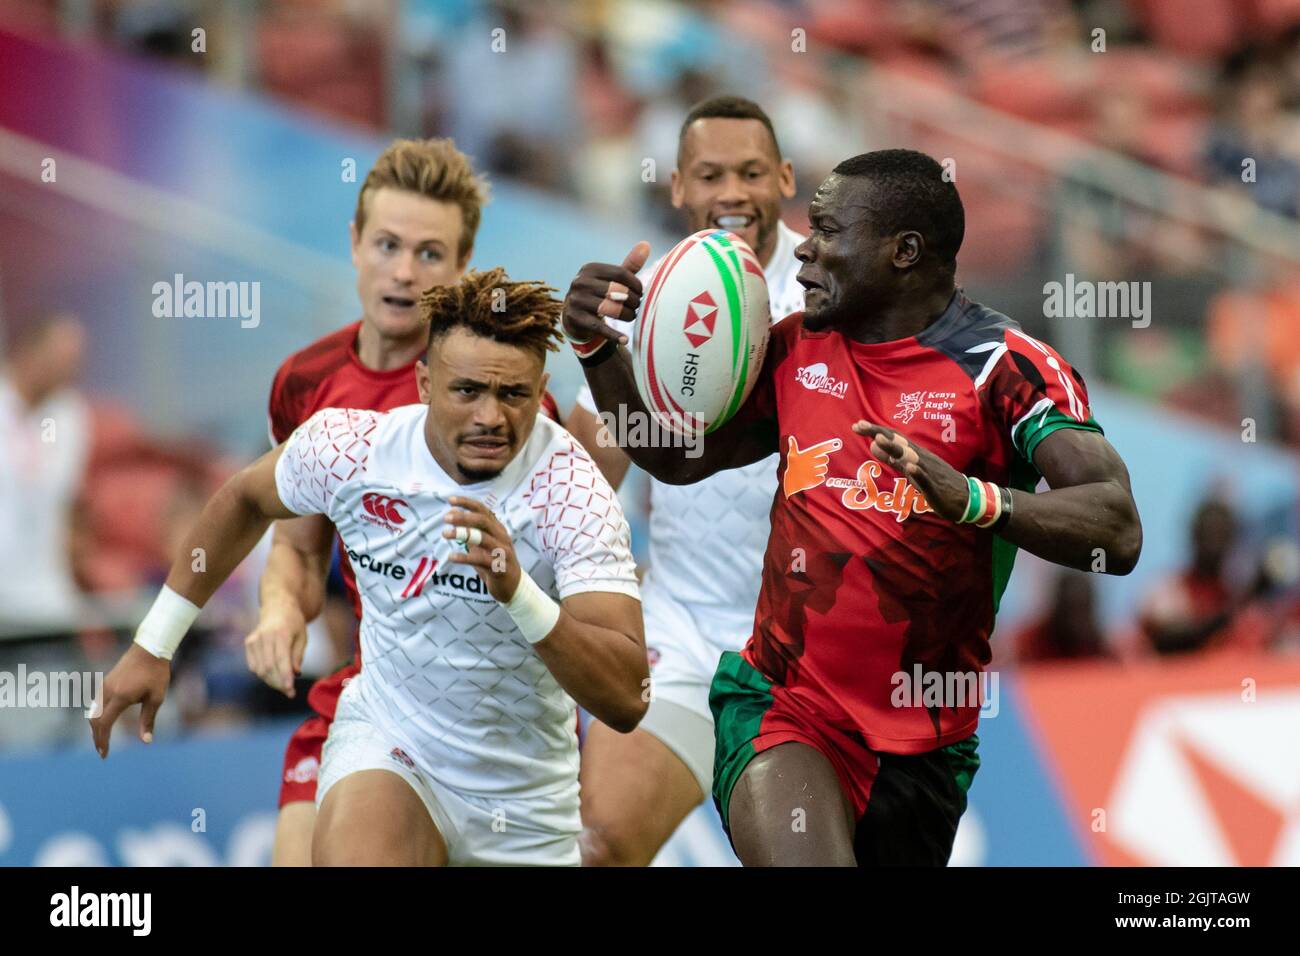 SINGAPORE-APRIL 13:Kenya 7s Team (red) plays against England 7s team (white) during Day 1 of HSBC World Rugby Singapore Sevens on April 13, 2019 at National Stadium in Singapore Stock Photo